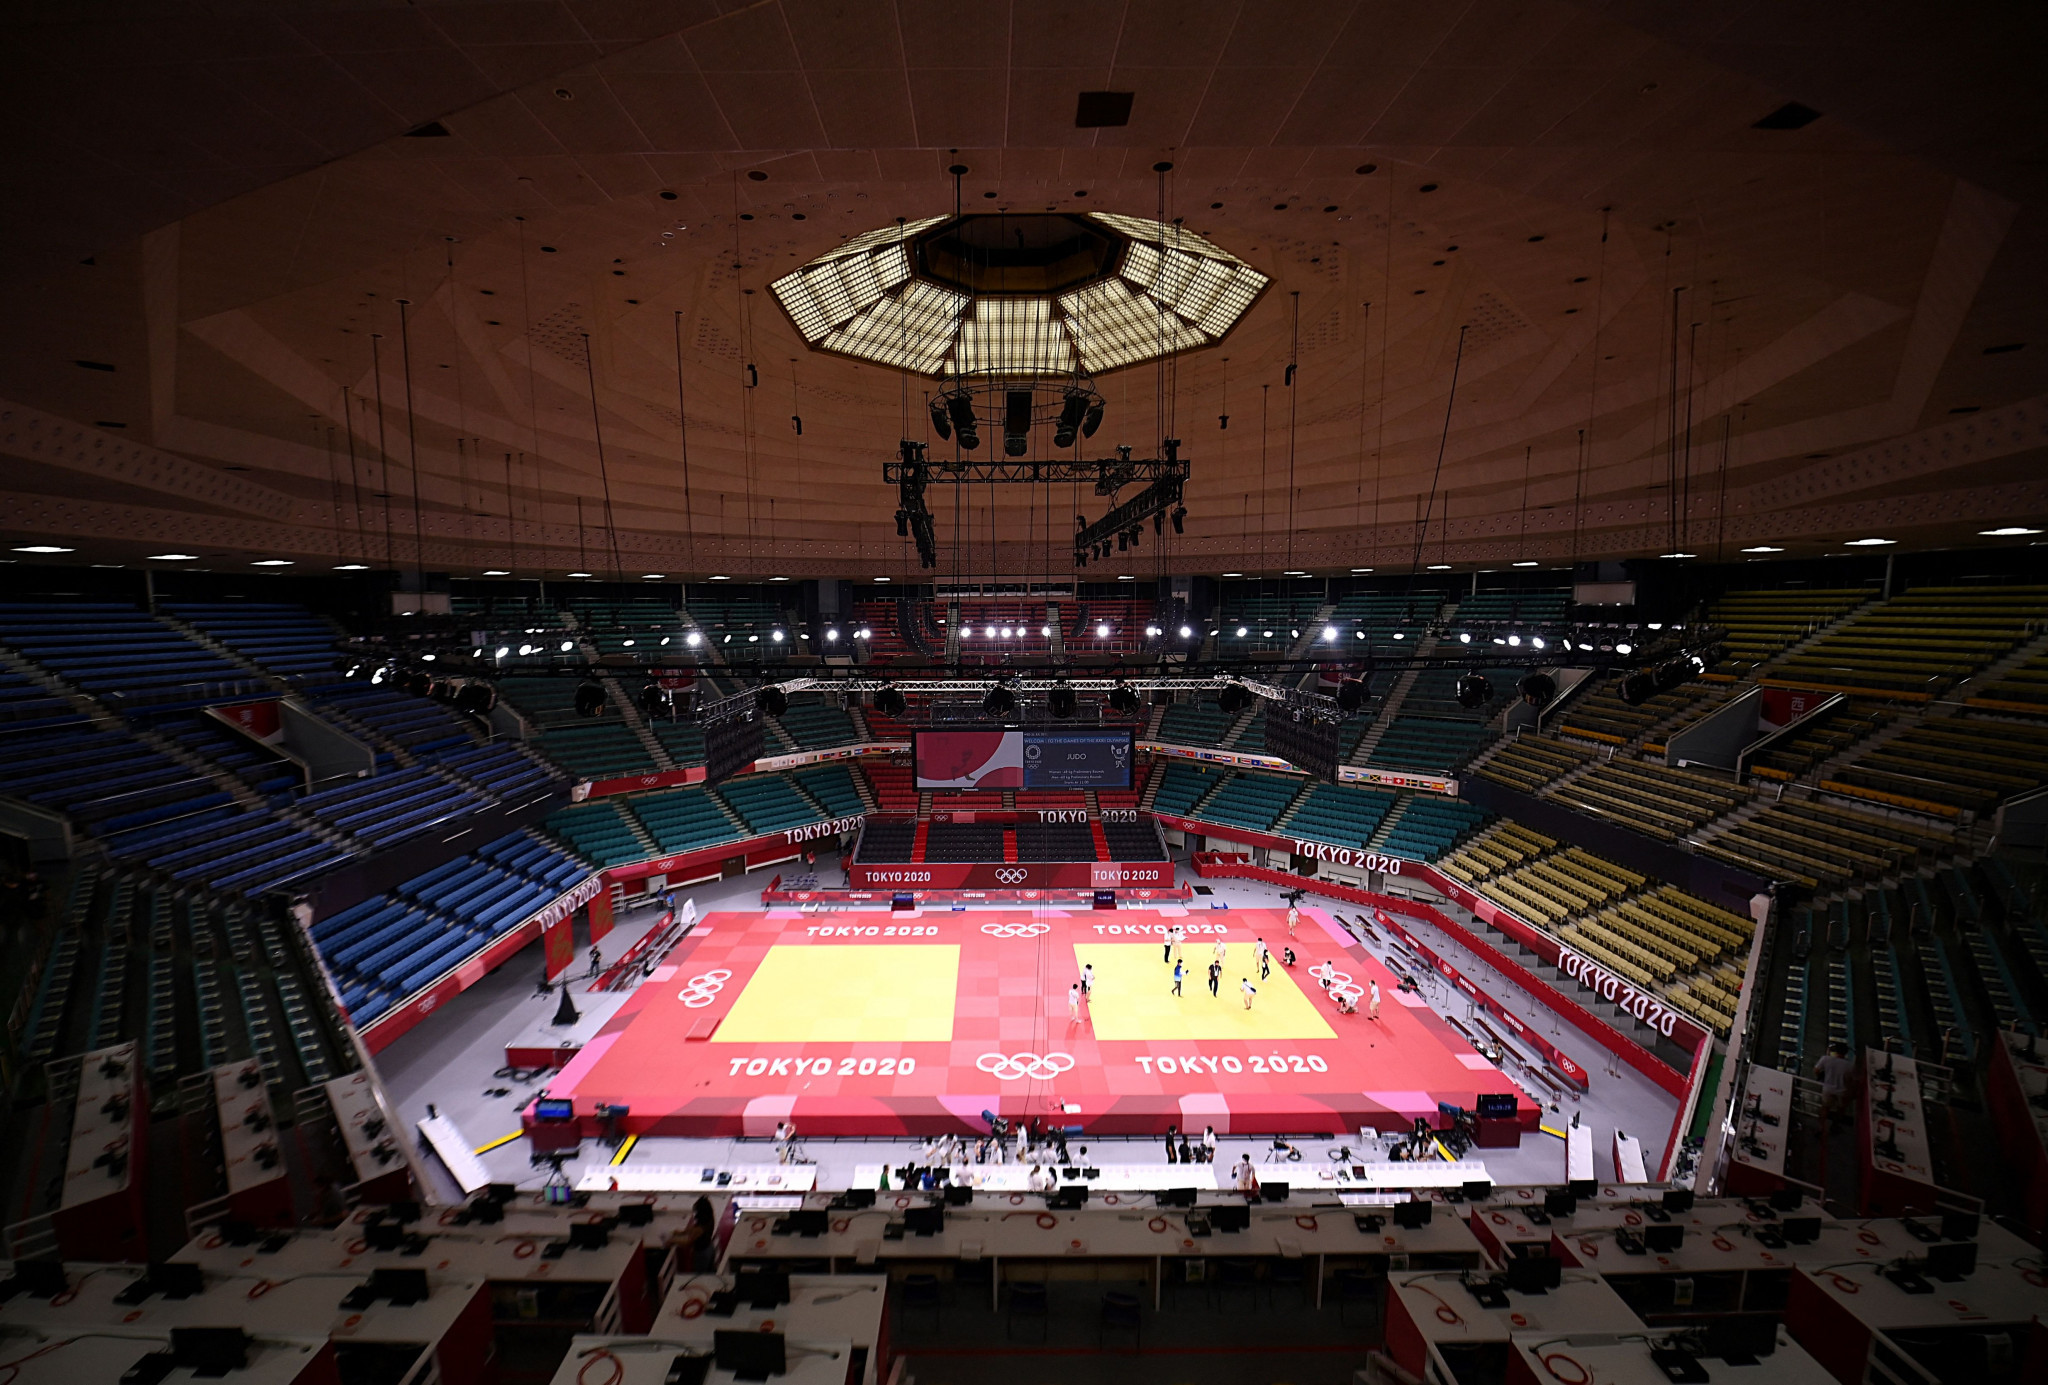 Judo at the Tokyo 2020 Paralympic Games will take place at the Nippon Budokan ©Getty Images